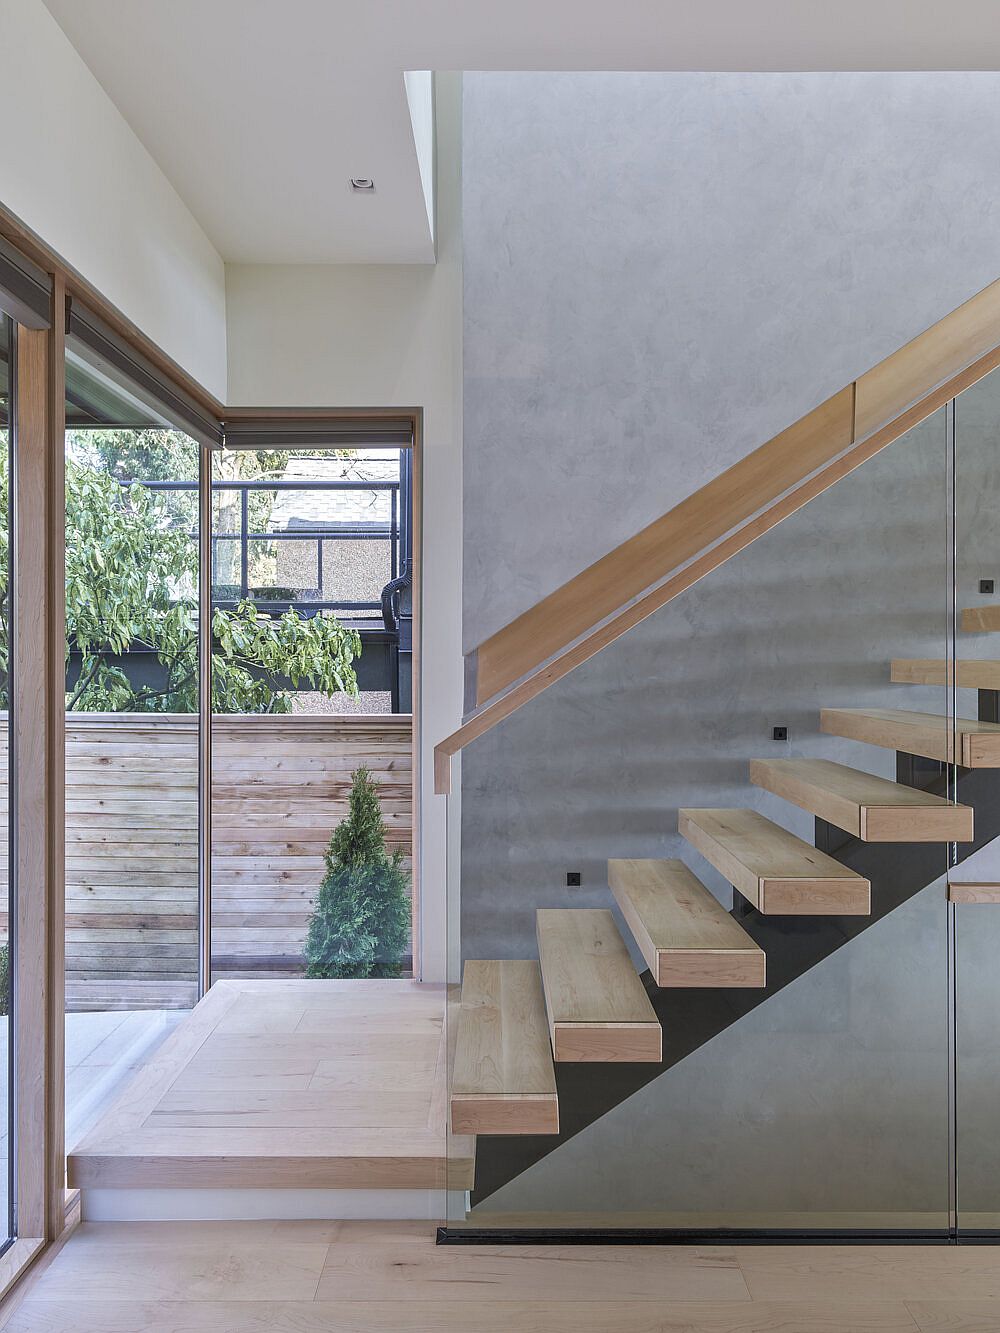 Sleek and stylish glass and wood staircase inside the house with modern design